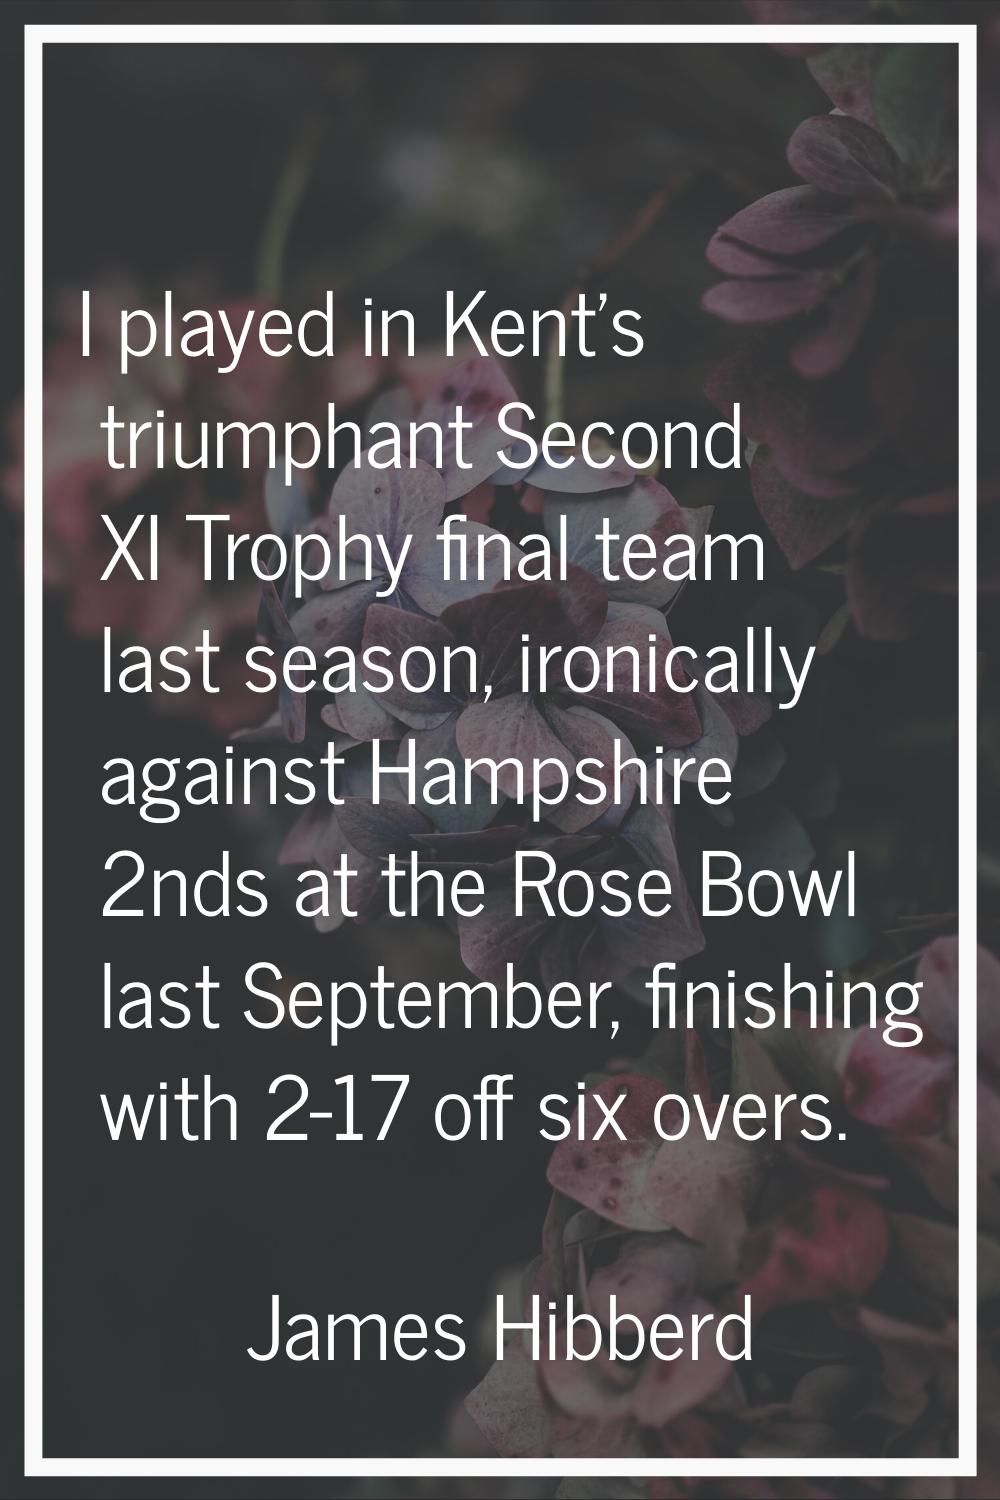 I played in Kent's triumphant Second XI Trophy final team last season, ironically against Hampshire